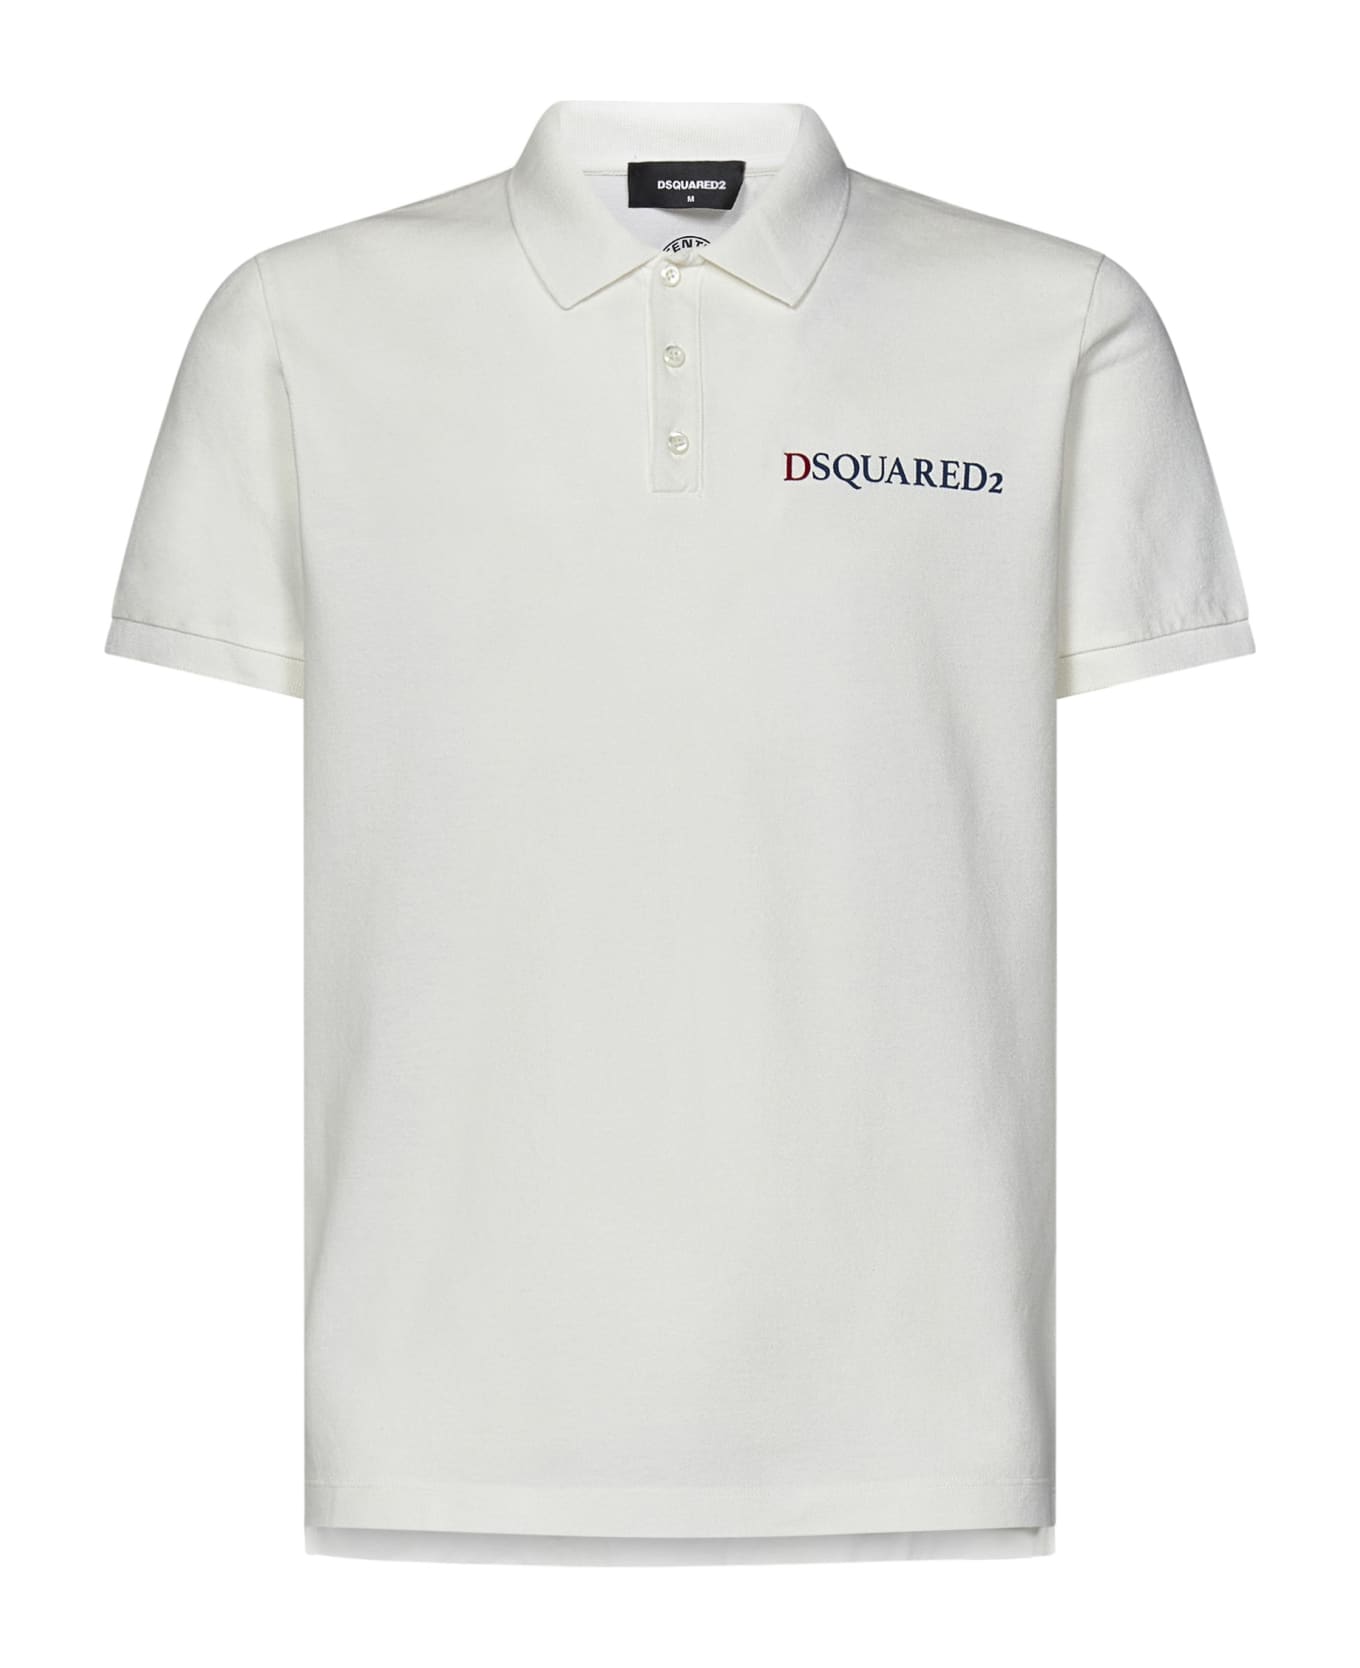 Dsquared2 Backdoor Access Tennis Fit Polo Shirt - White ポロシャツ